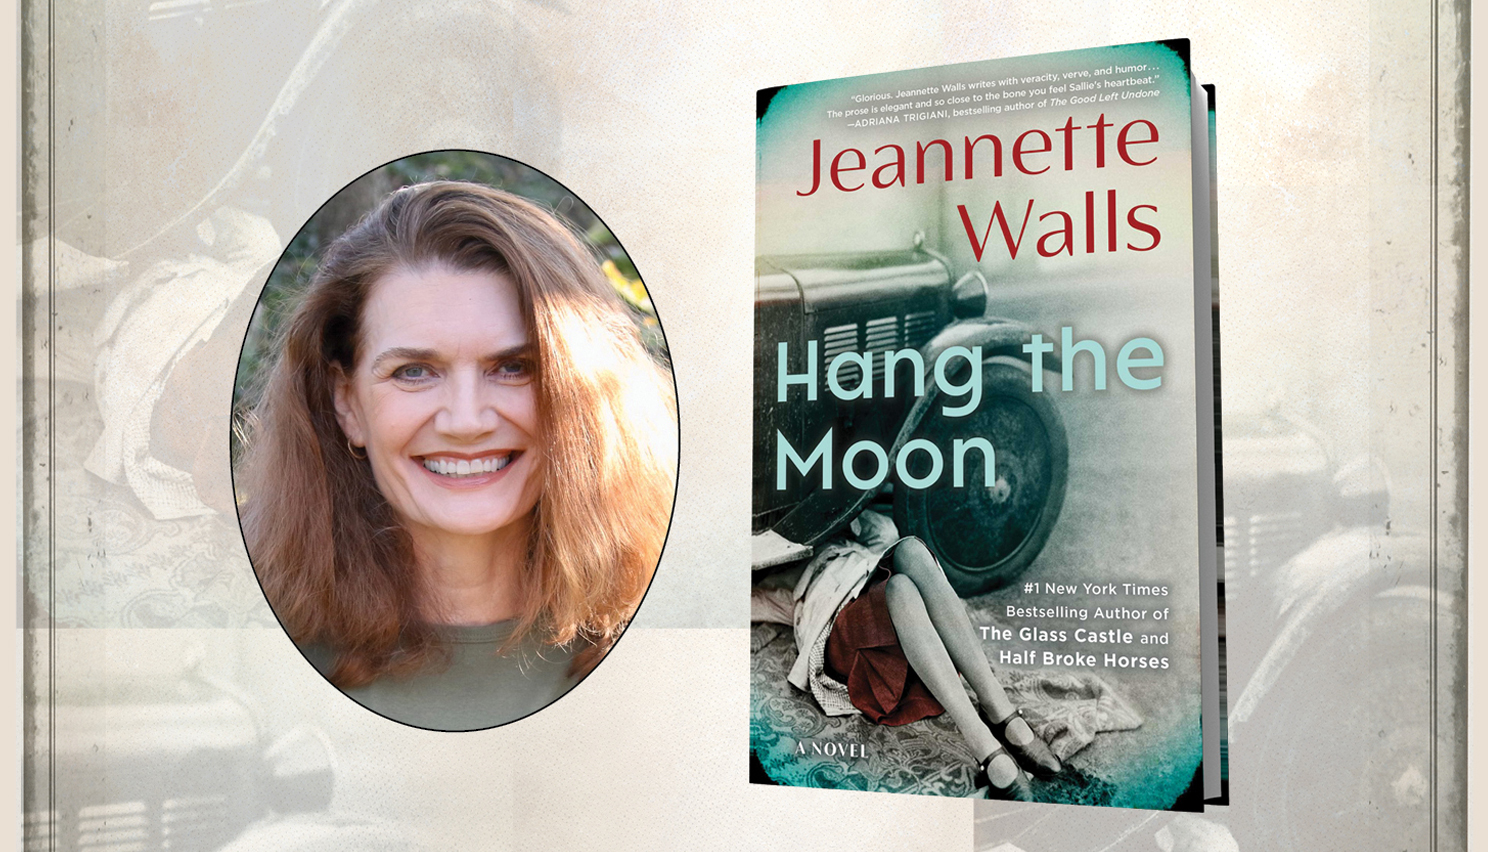 Author Jeannette Walls discusses her latest book Hang the Moon - CBS News